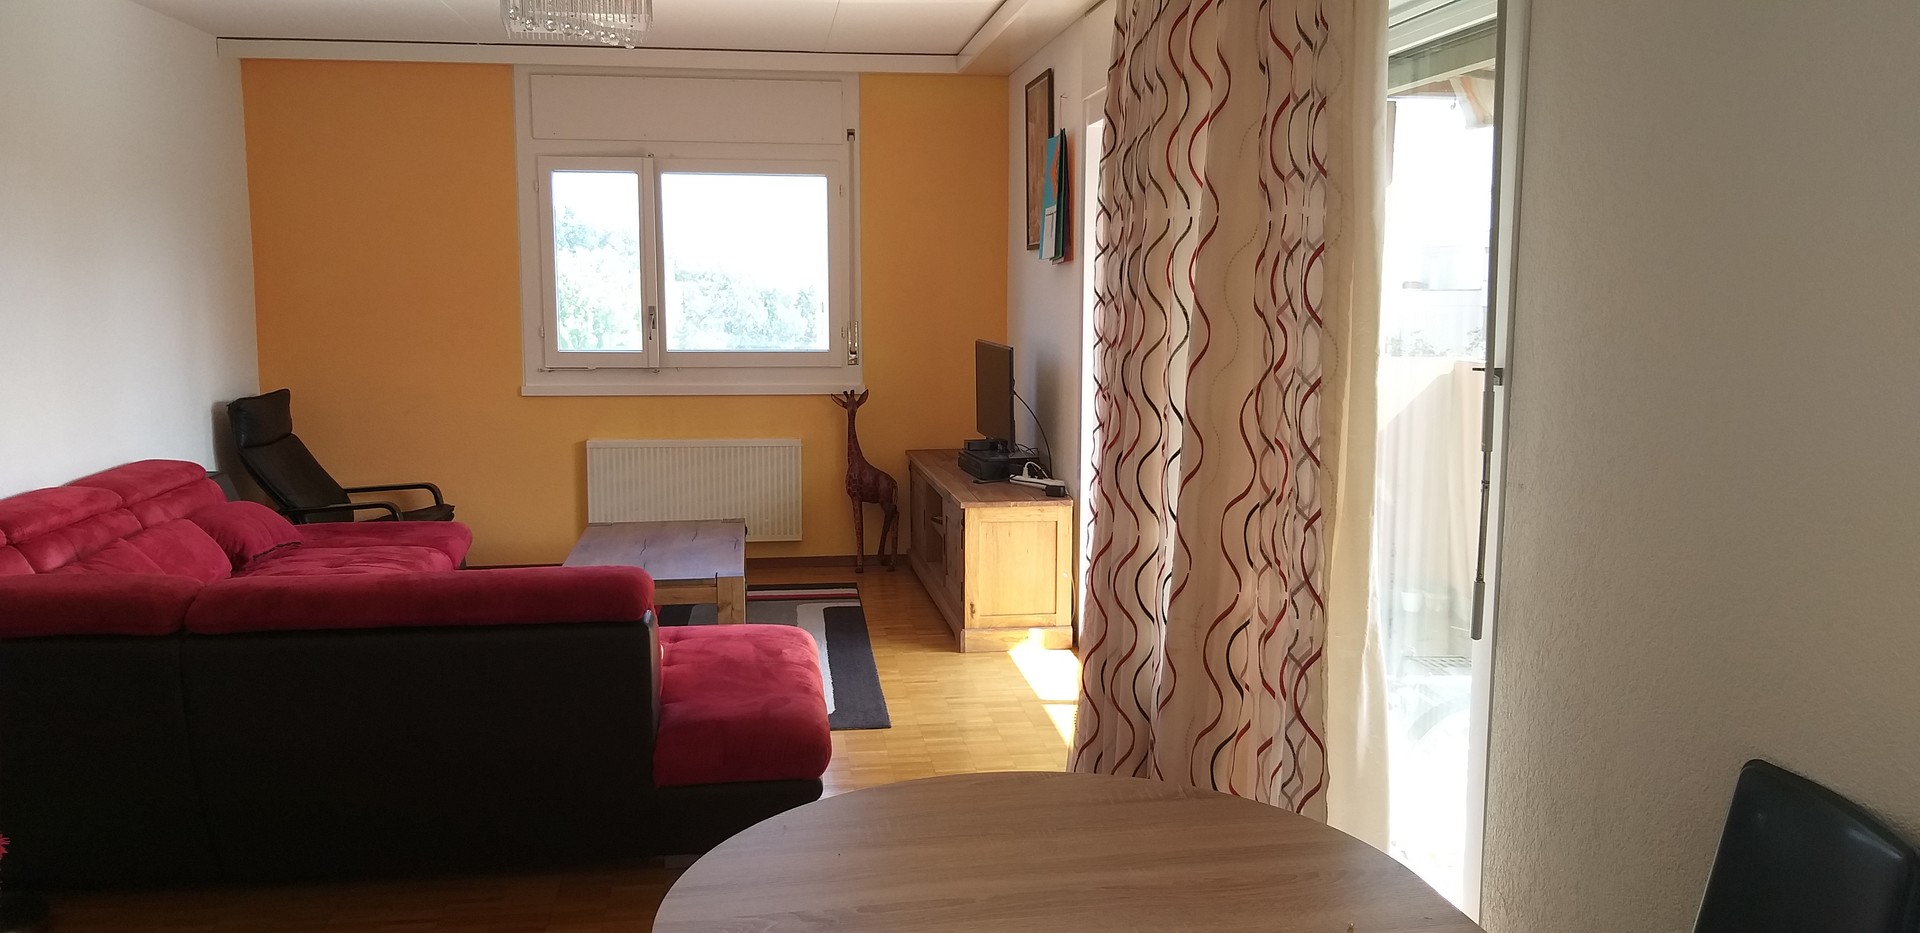 Room For Rent In 2 Bedroom Apartment In Lausanne With Internet And With Elevator